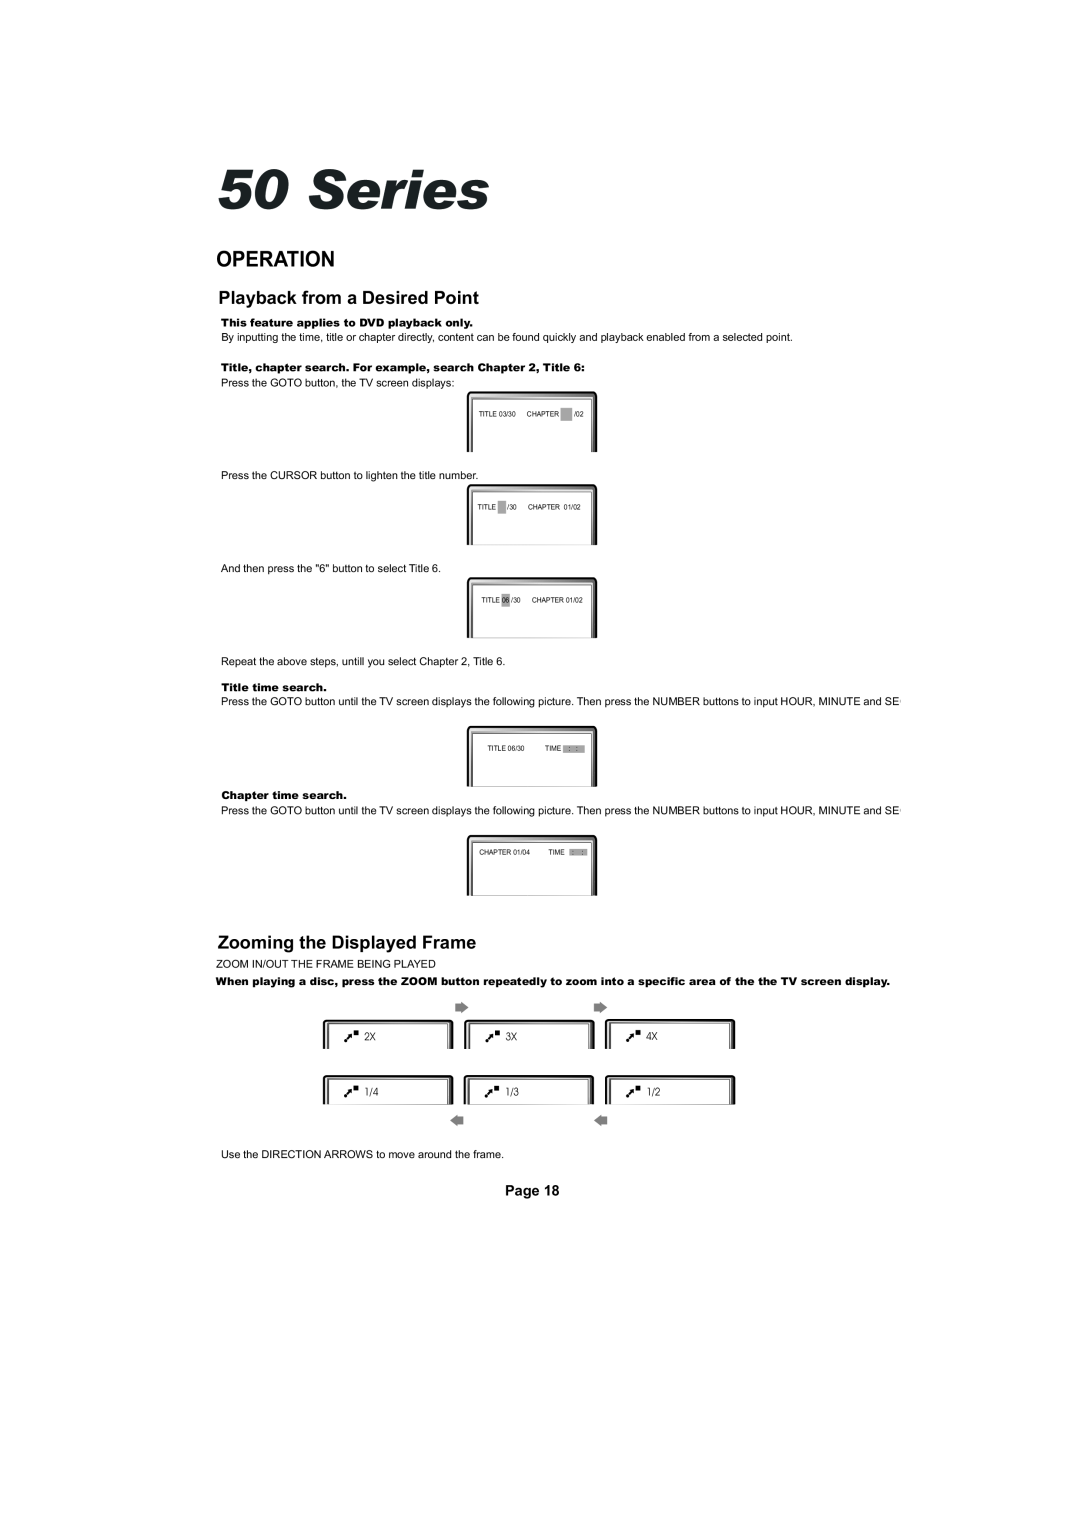 Cambridge Audio SERIES50 owner manual Playback from a Desired Point, Zooming the Displayed Frame, Series, Operation, Page 